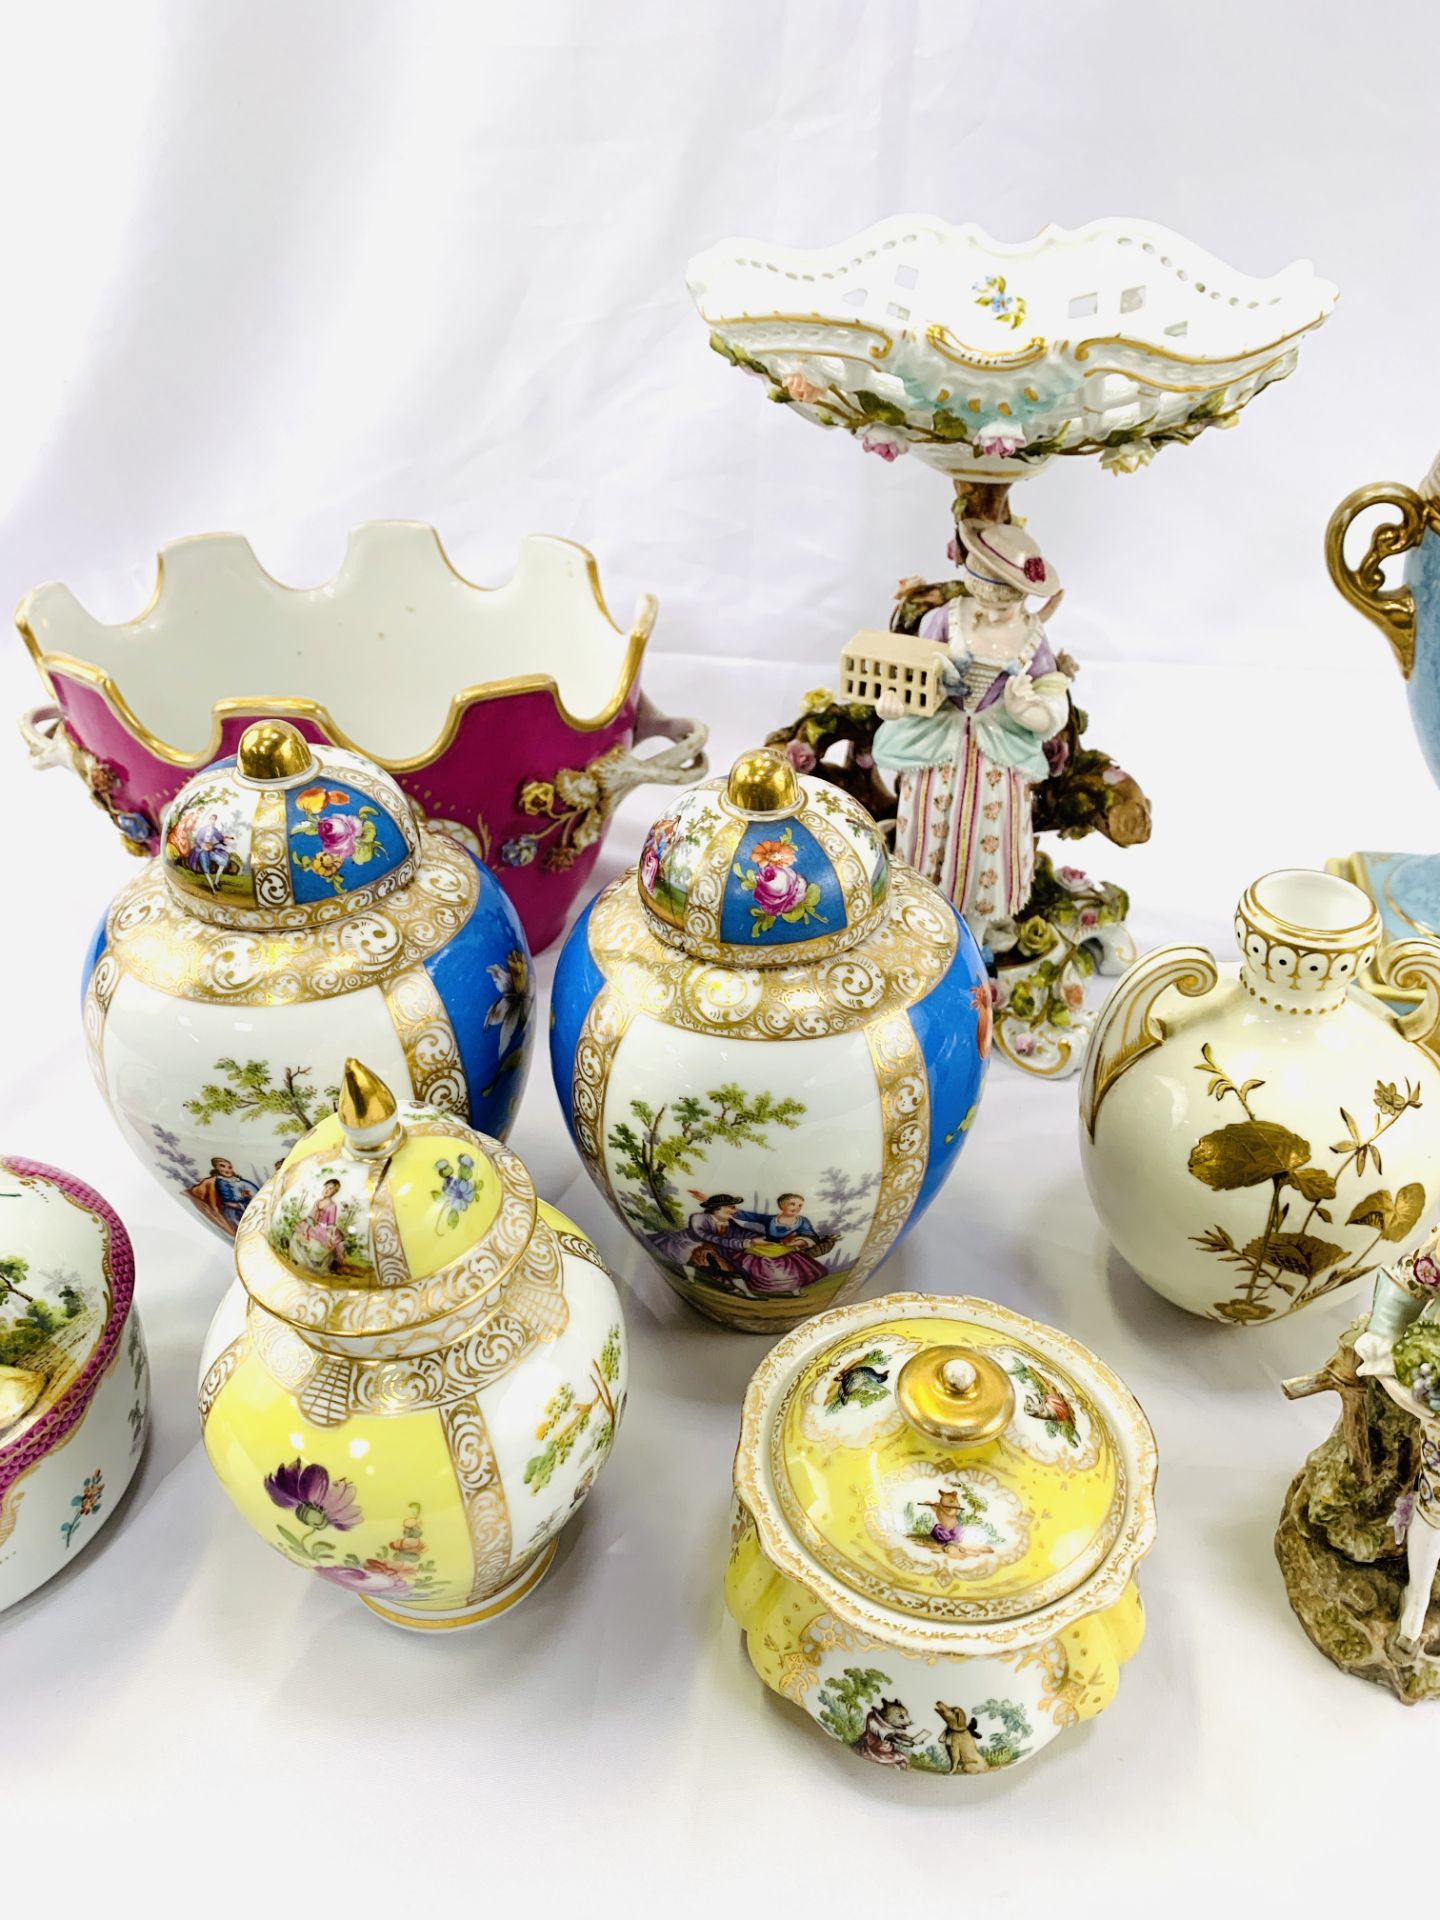 Collection of Dresden and Meissen porcelain - Image 6 of 9